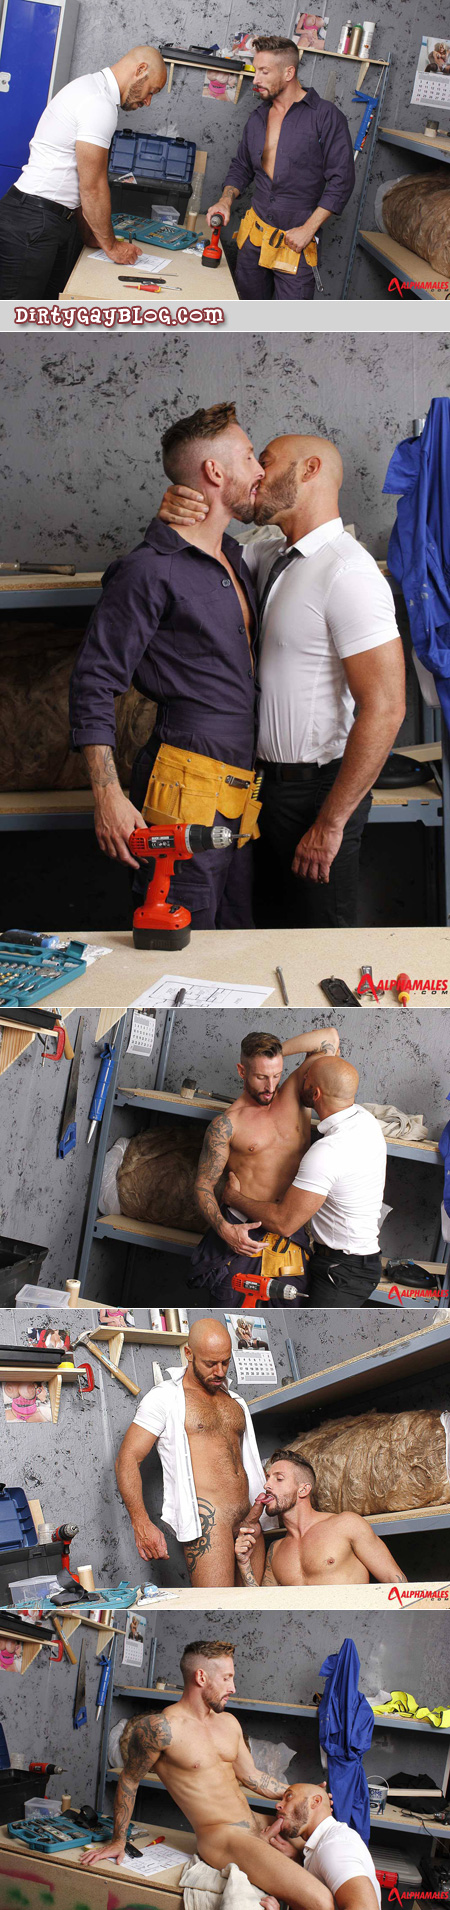 Male contractor and male builder making out in the workroom